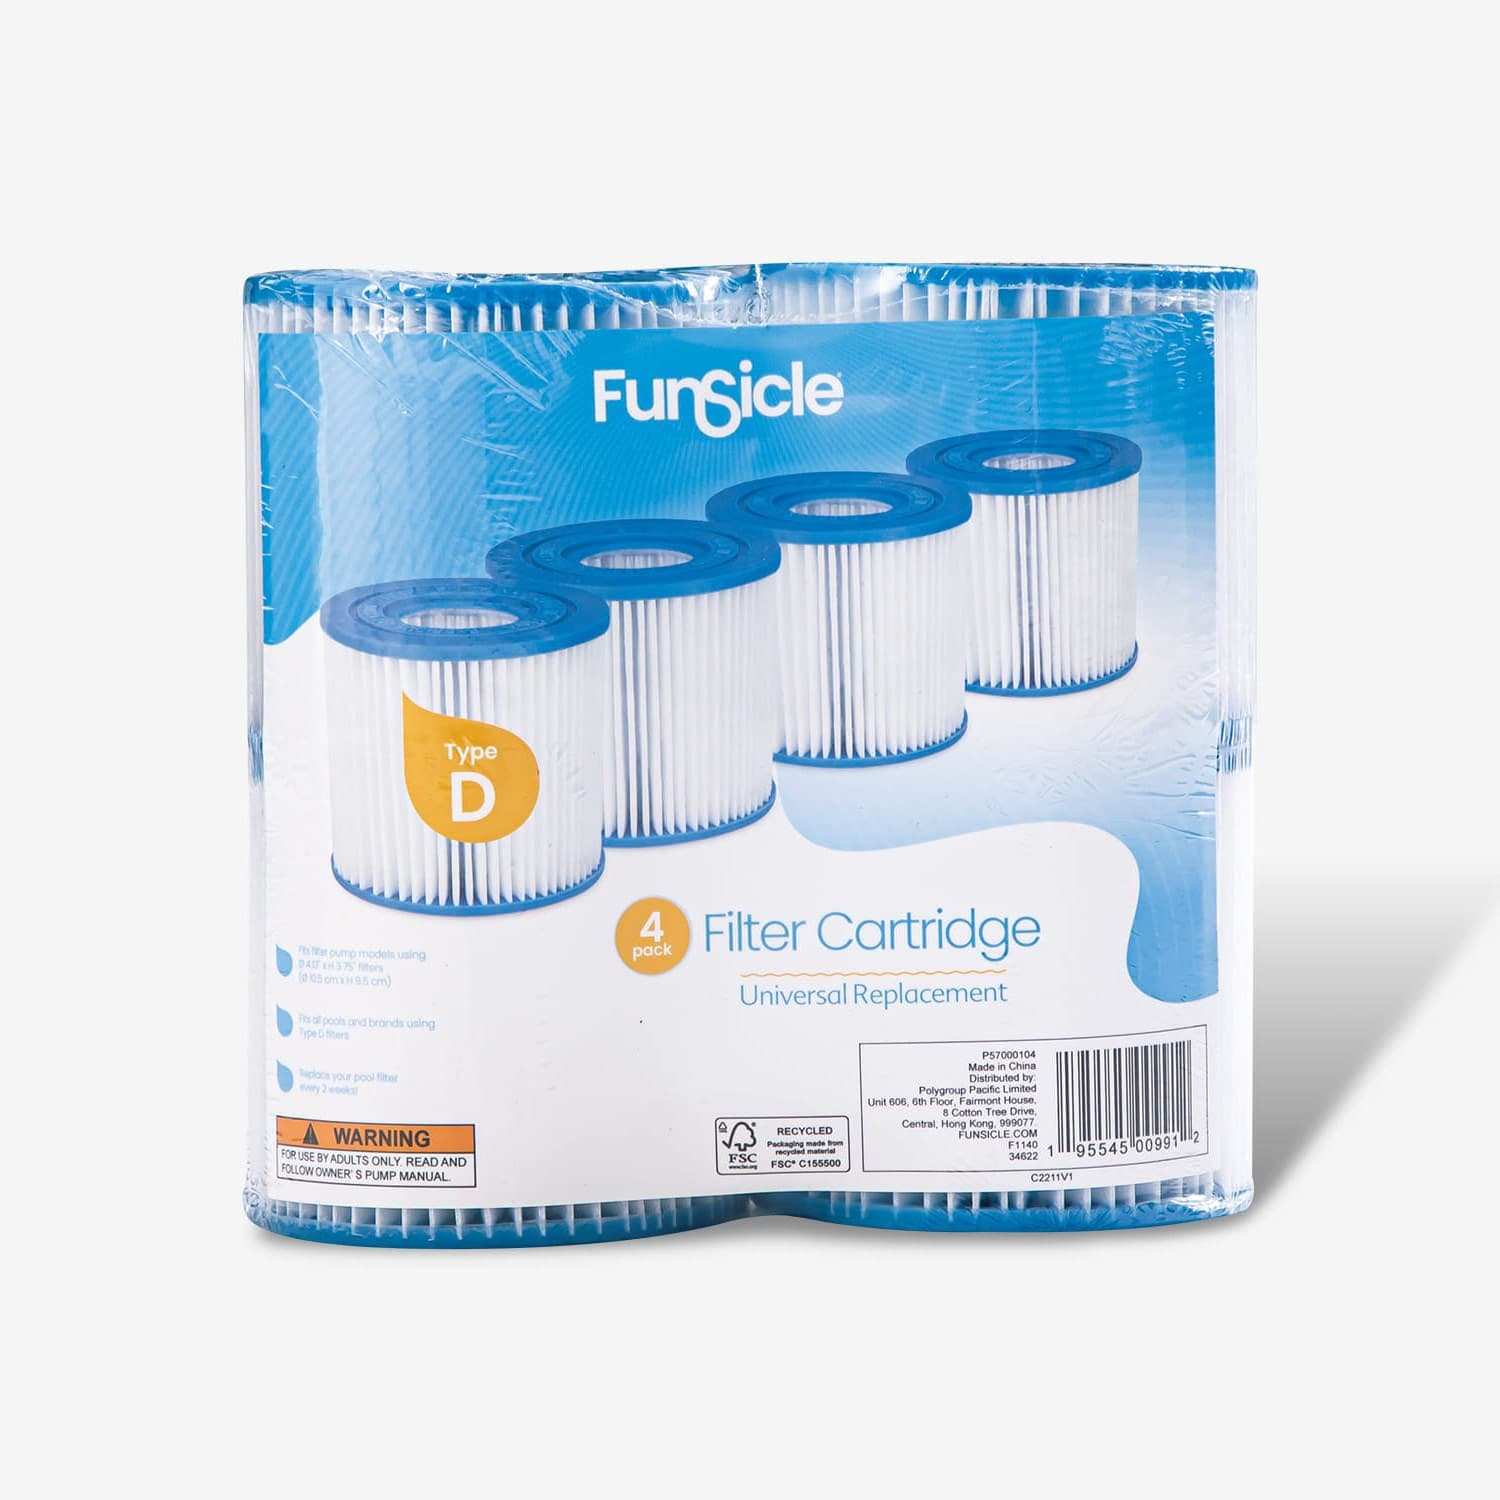 Funsicle Type D Filter Cartridge 4-pack packaging